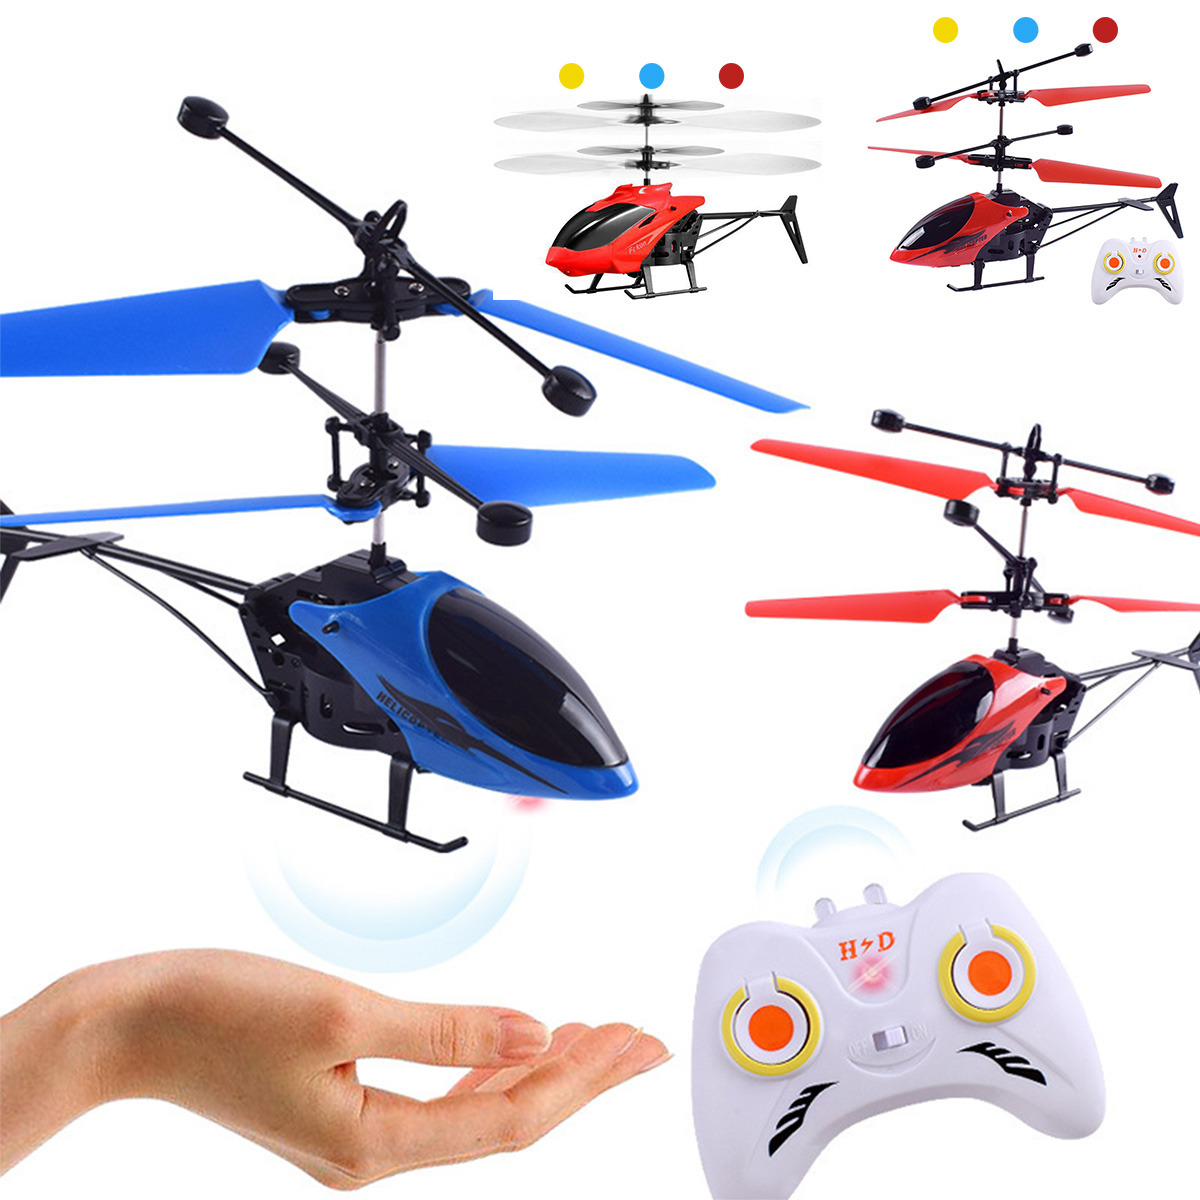 Flying Toy Flying Drone Flying Mini Guide Airplane Remote Control Airplane Helicopter Noiseless Infrared Induction Flying Toy